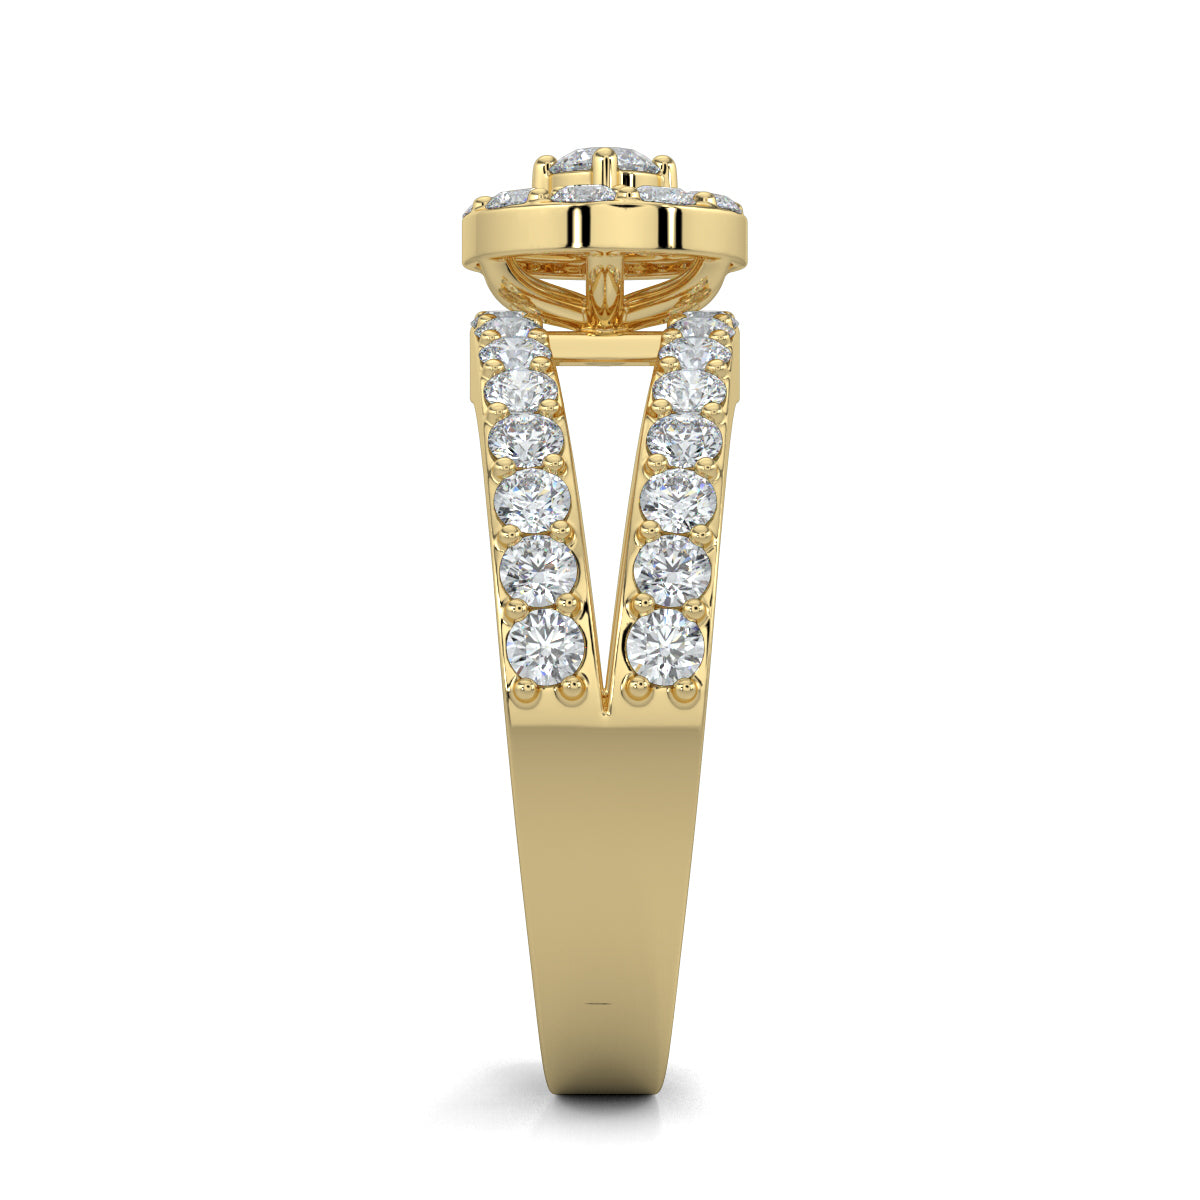 Yellow Gold, Diamond Ring, Trillion cut, Timeless, Elegancec, Luxury Jewellery, Contemporary Flair, Sparkle, Daily Wear, Exquisite metals, Ocassion Jewellery